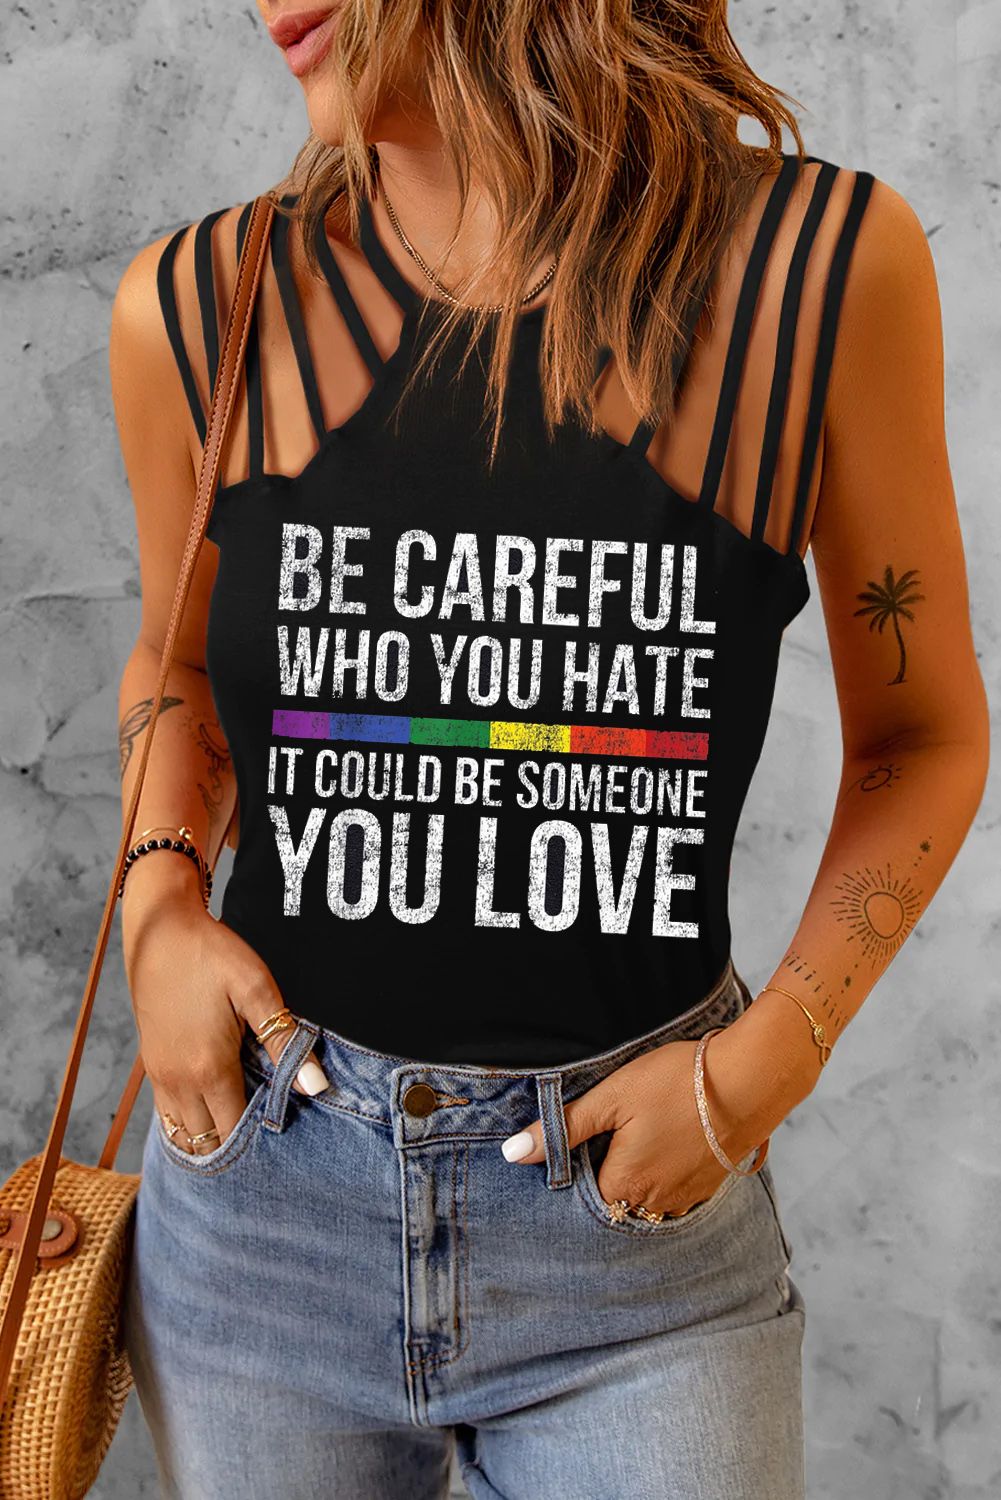 LC2569570-2-S, LC2569570-2-M, LC2569570-2-L, LC2569570-2-XL, LC2569570-2-2XL, Black  Women Be Careful Who You Hate It Could Be Someone You Love Shirt Casual Tops